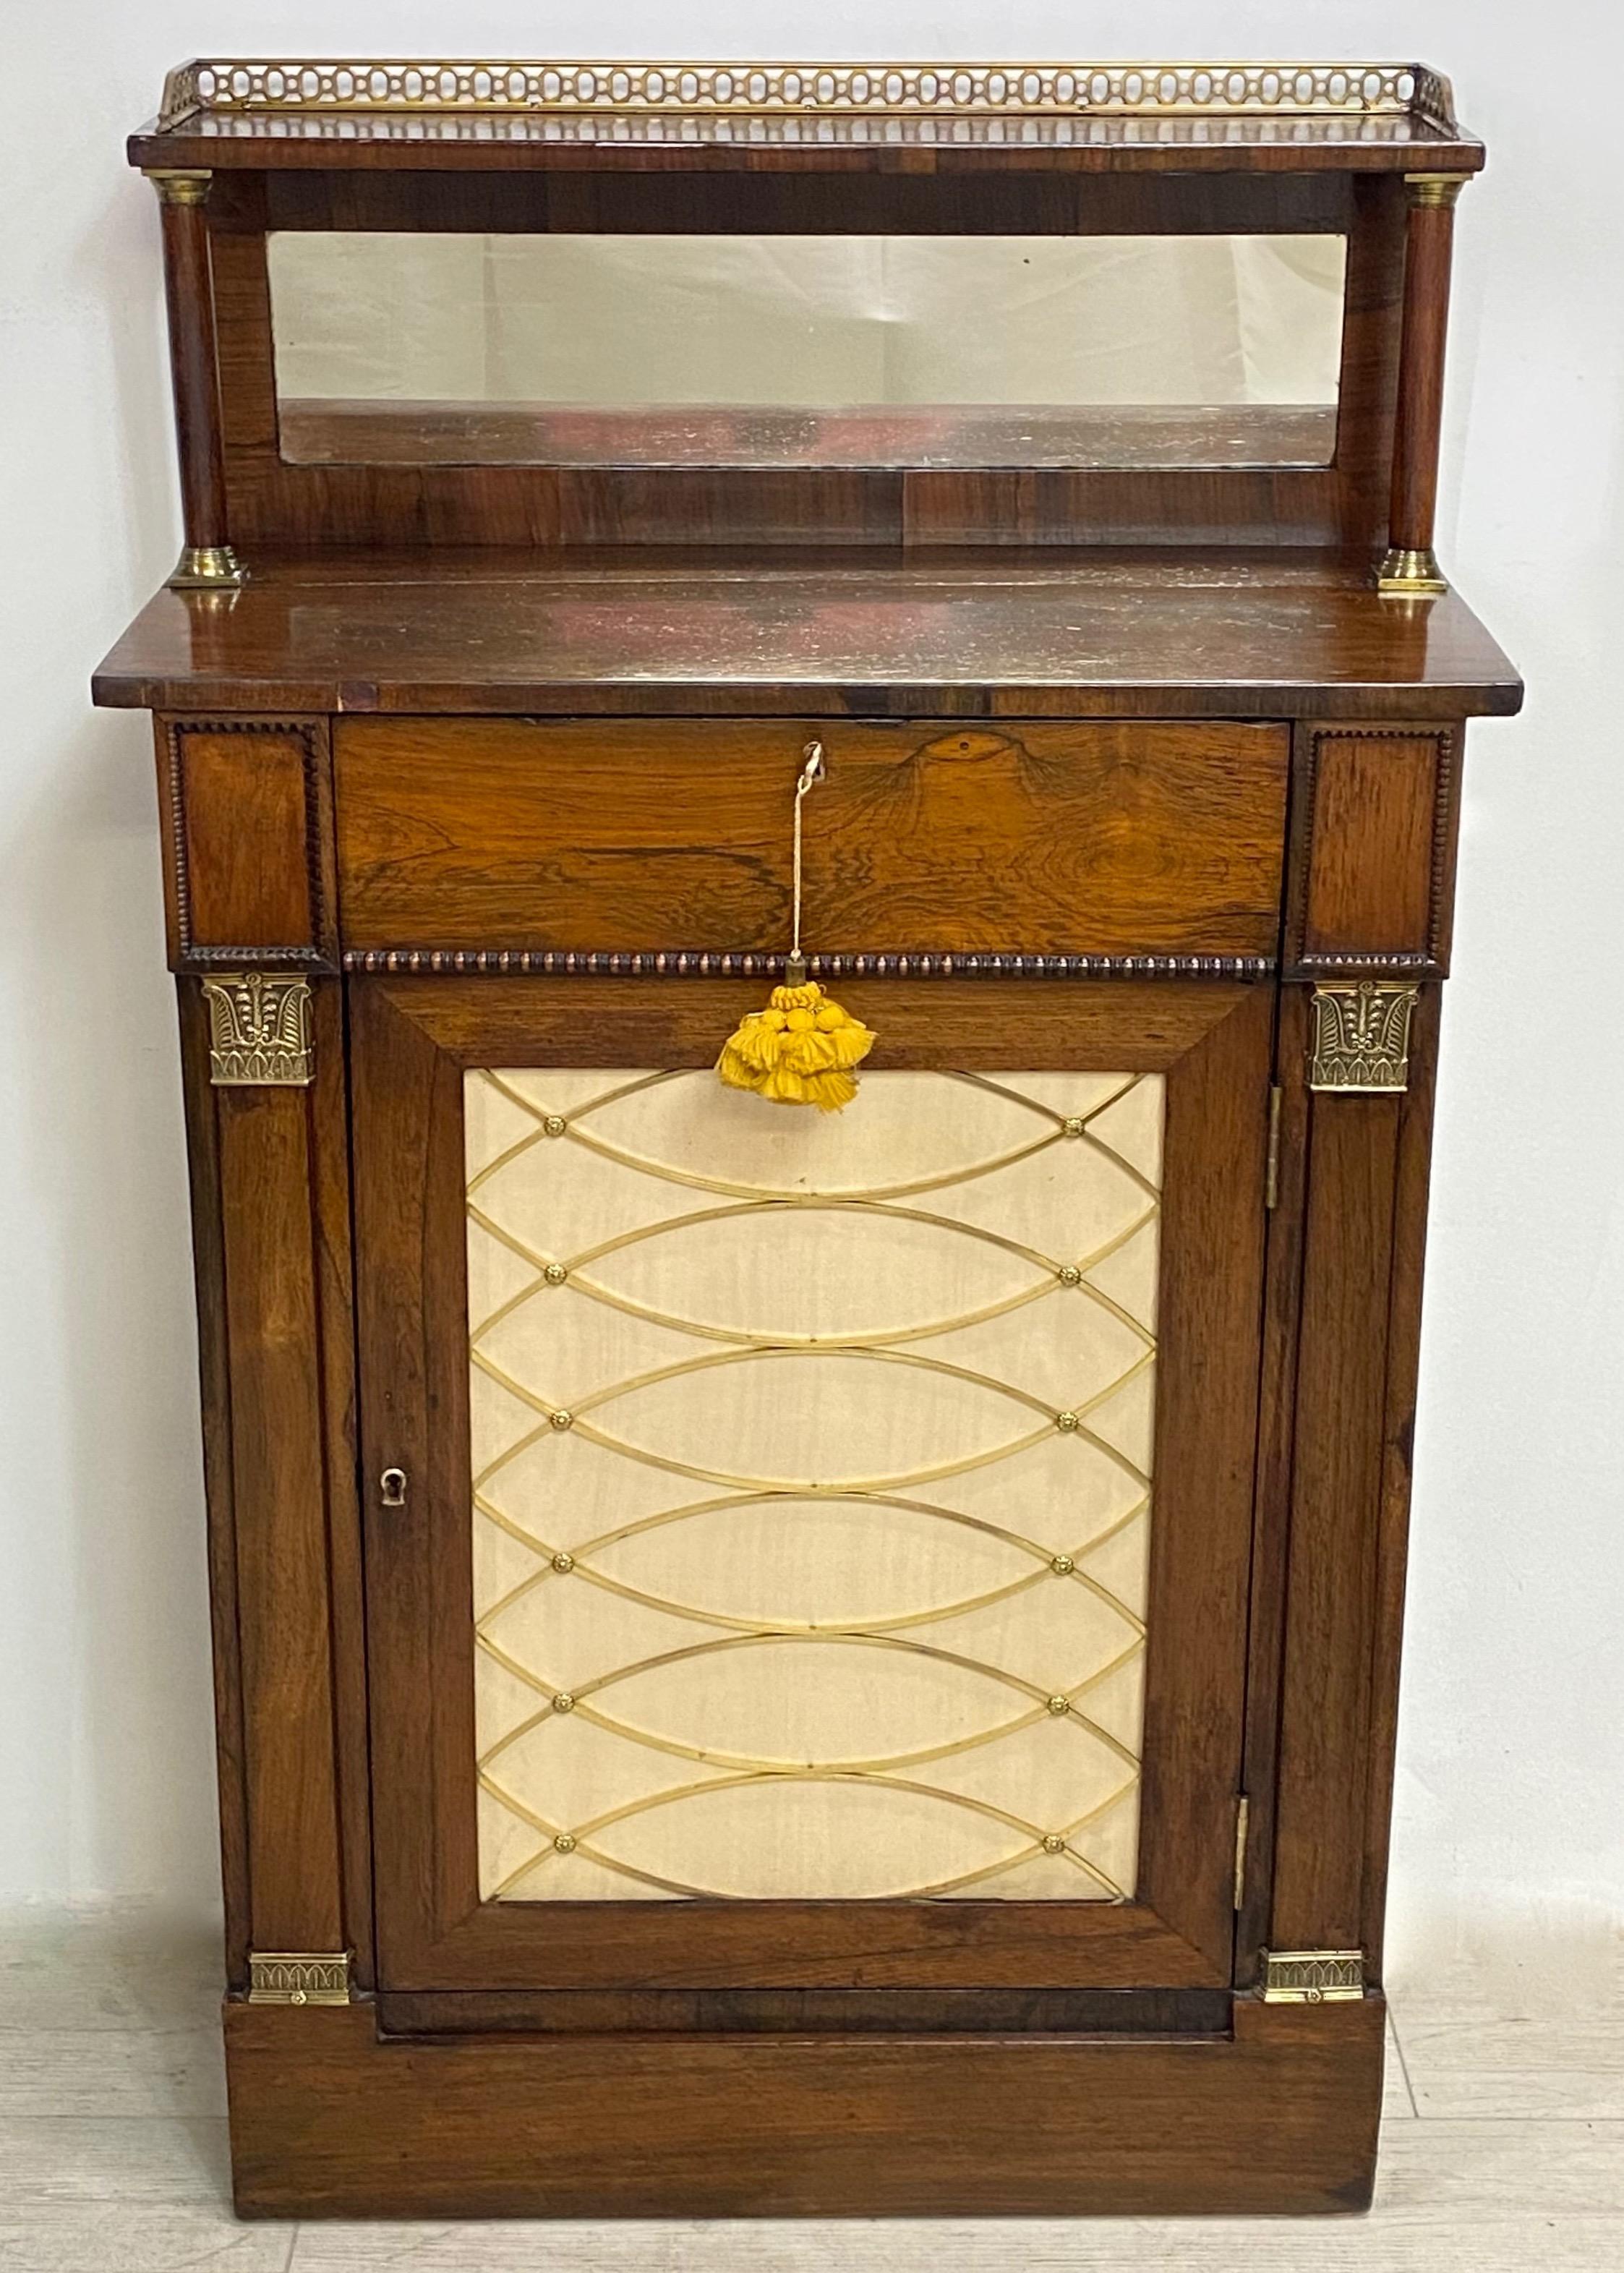 A fine quality diminutive size English Regency rosewood cabinet or chiffonier. Having a pierced gallery top shelf over a center mirror, a single center drawer, original brass grate door front with original silk fabric, and detailed bronze side